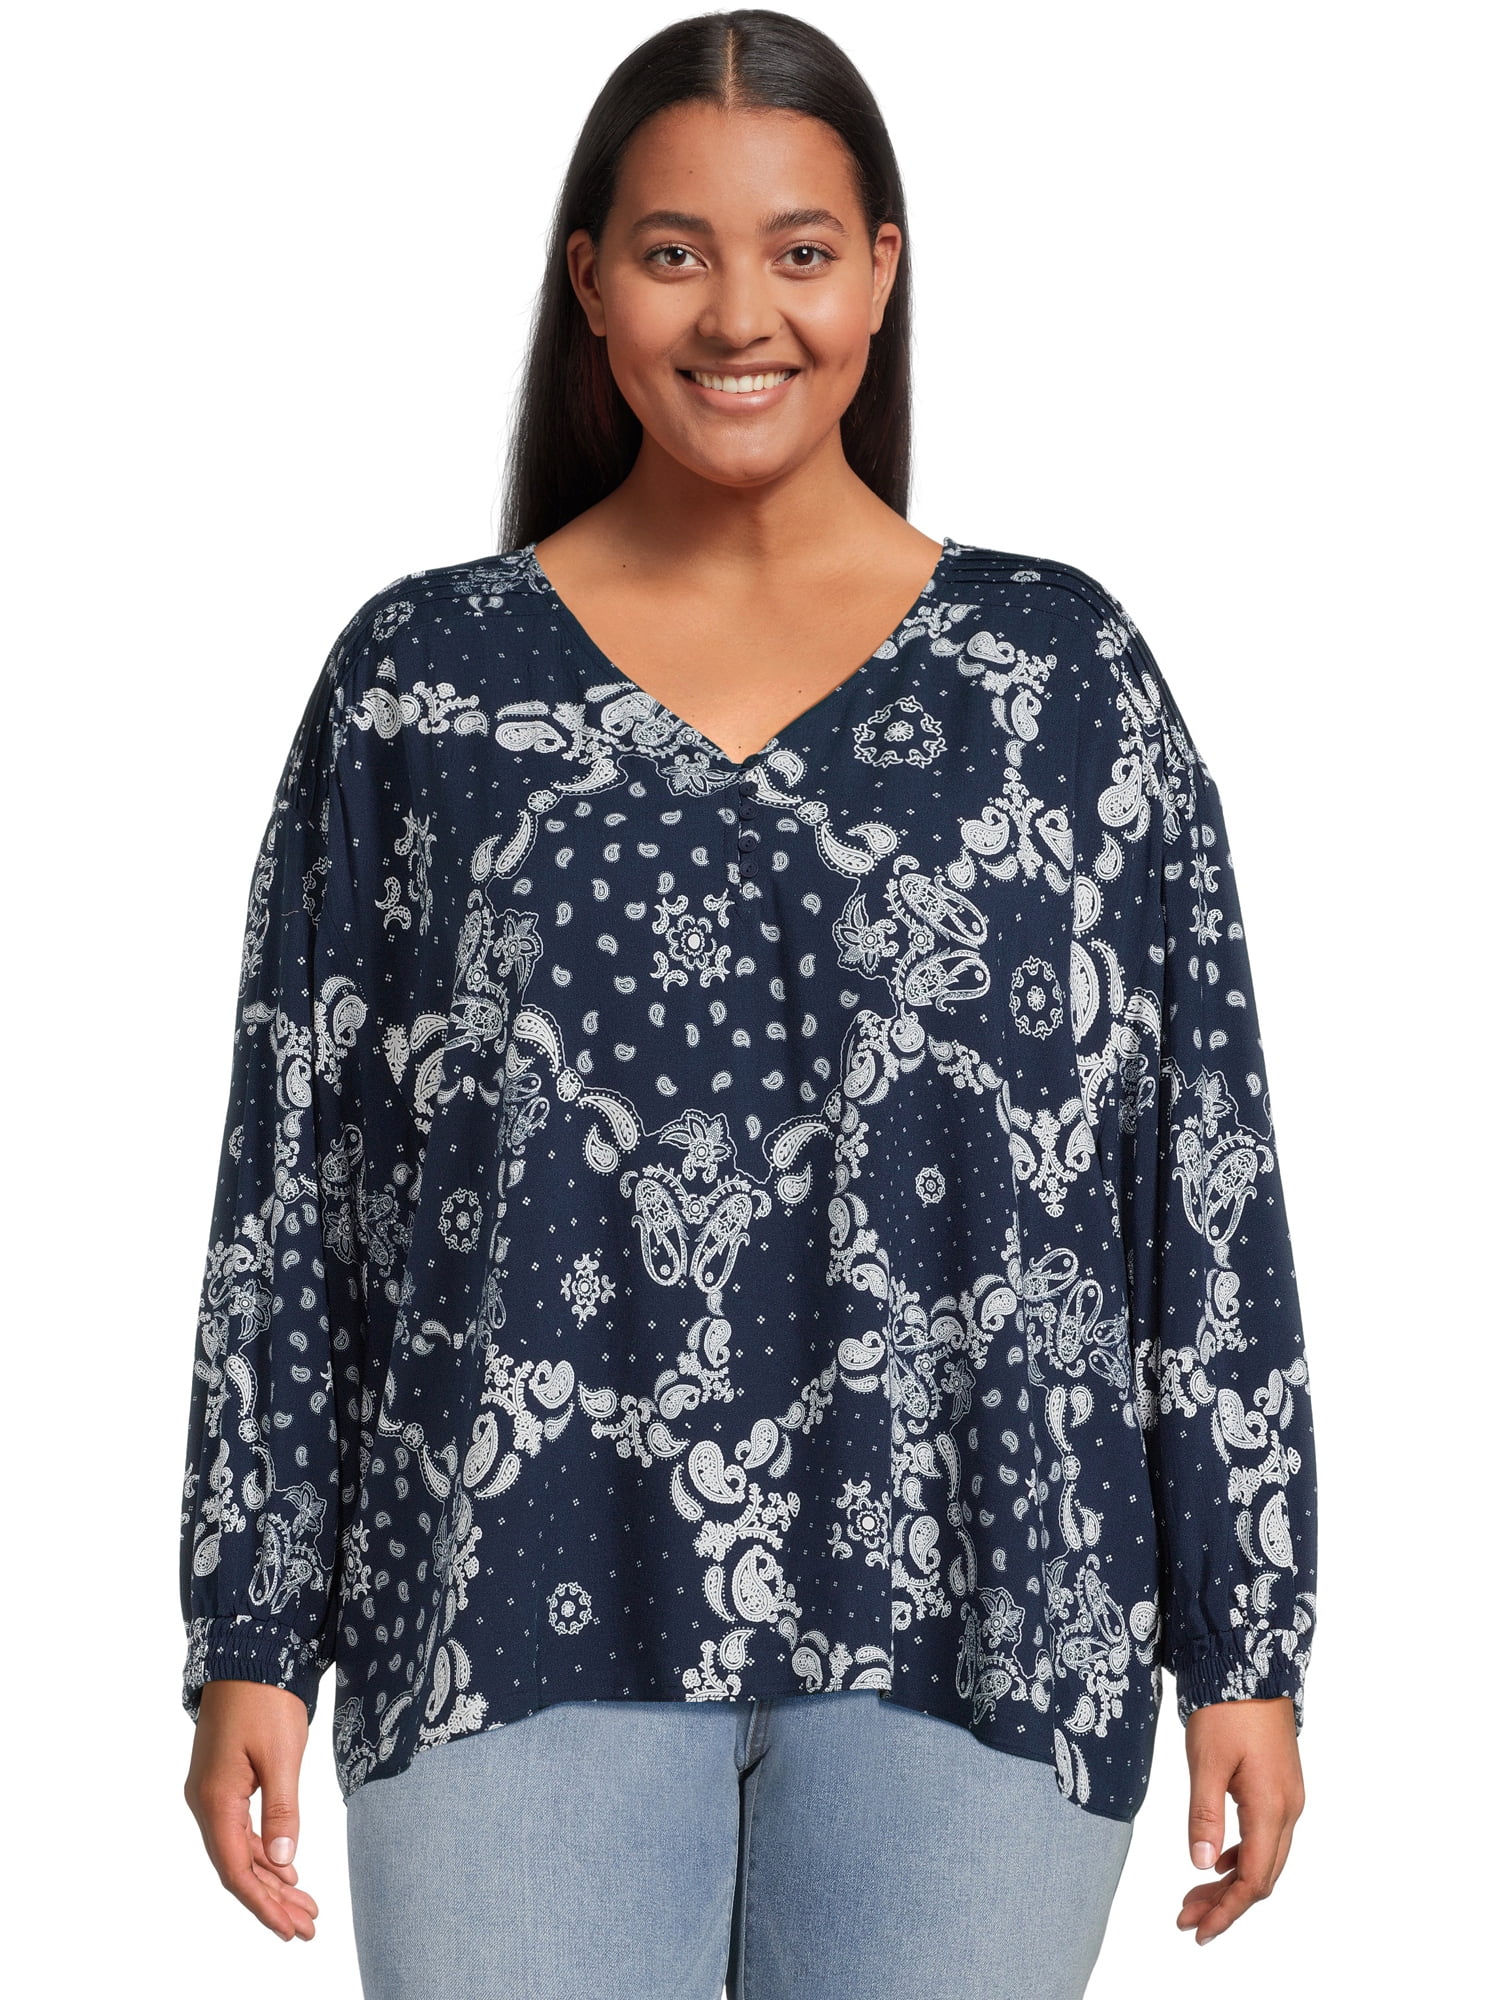 Terra & Sky Women's Plus Size Print Henley Top with Long Sleeves ...